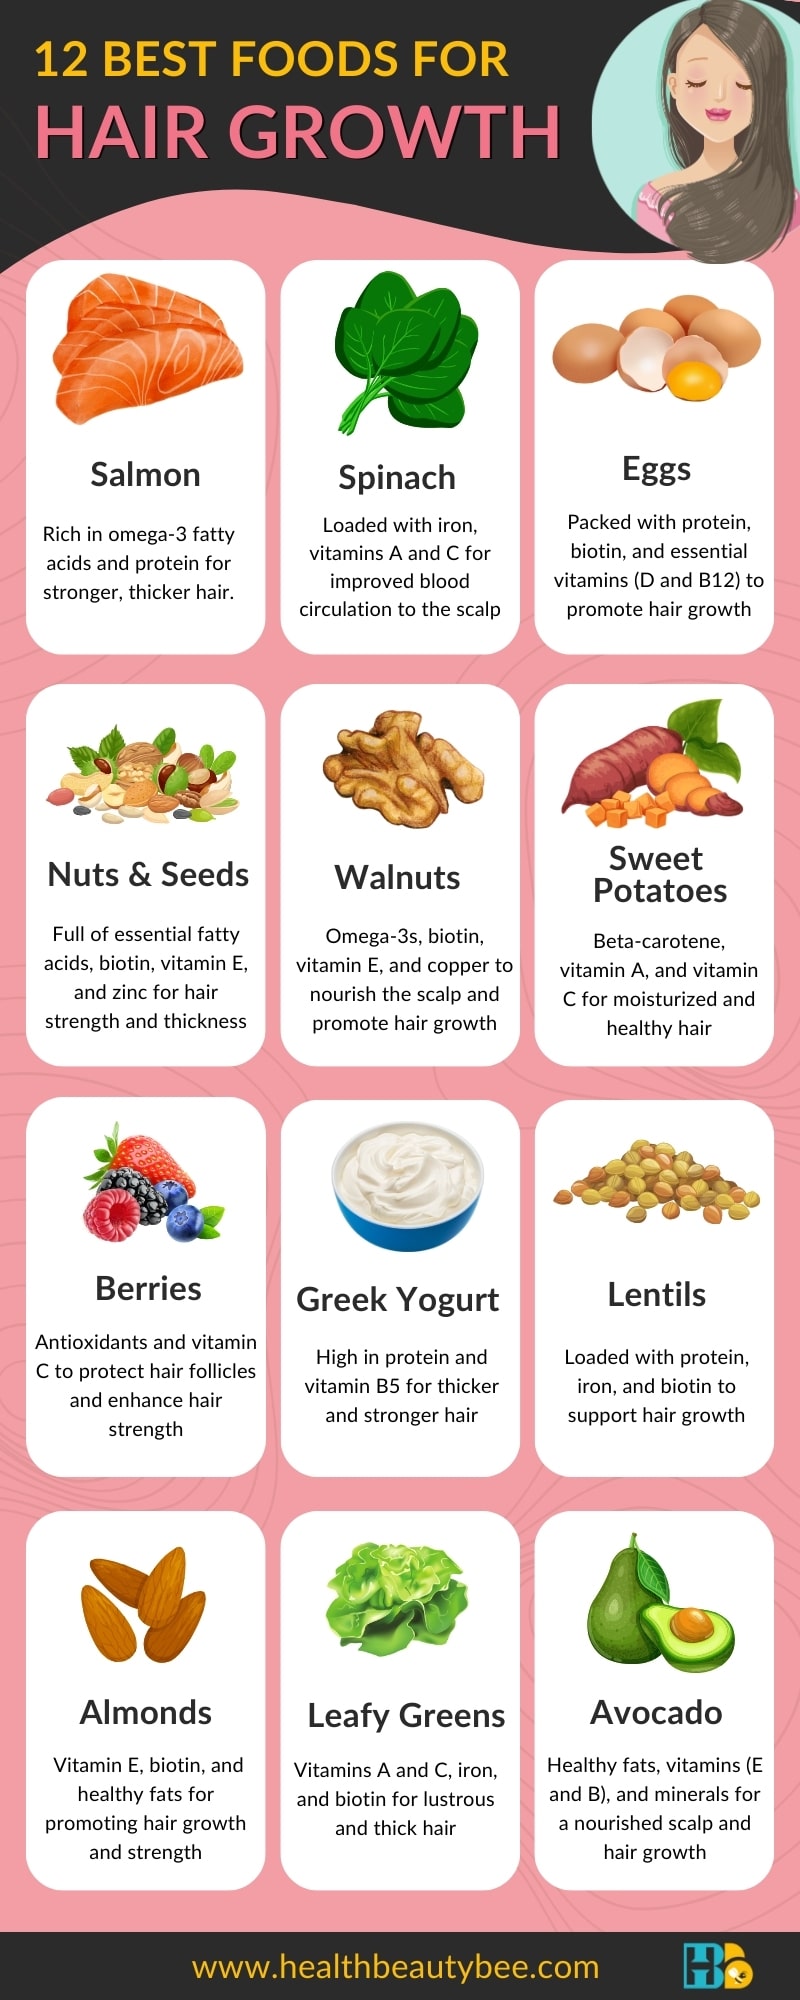 12 Best Foods for Hair Growth and Thickness infographic healthbeautybee